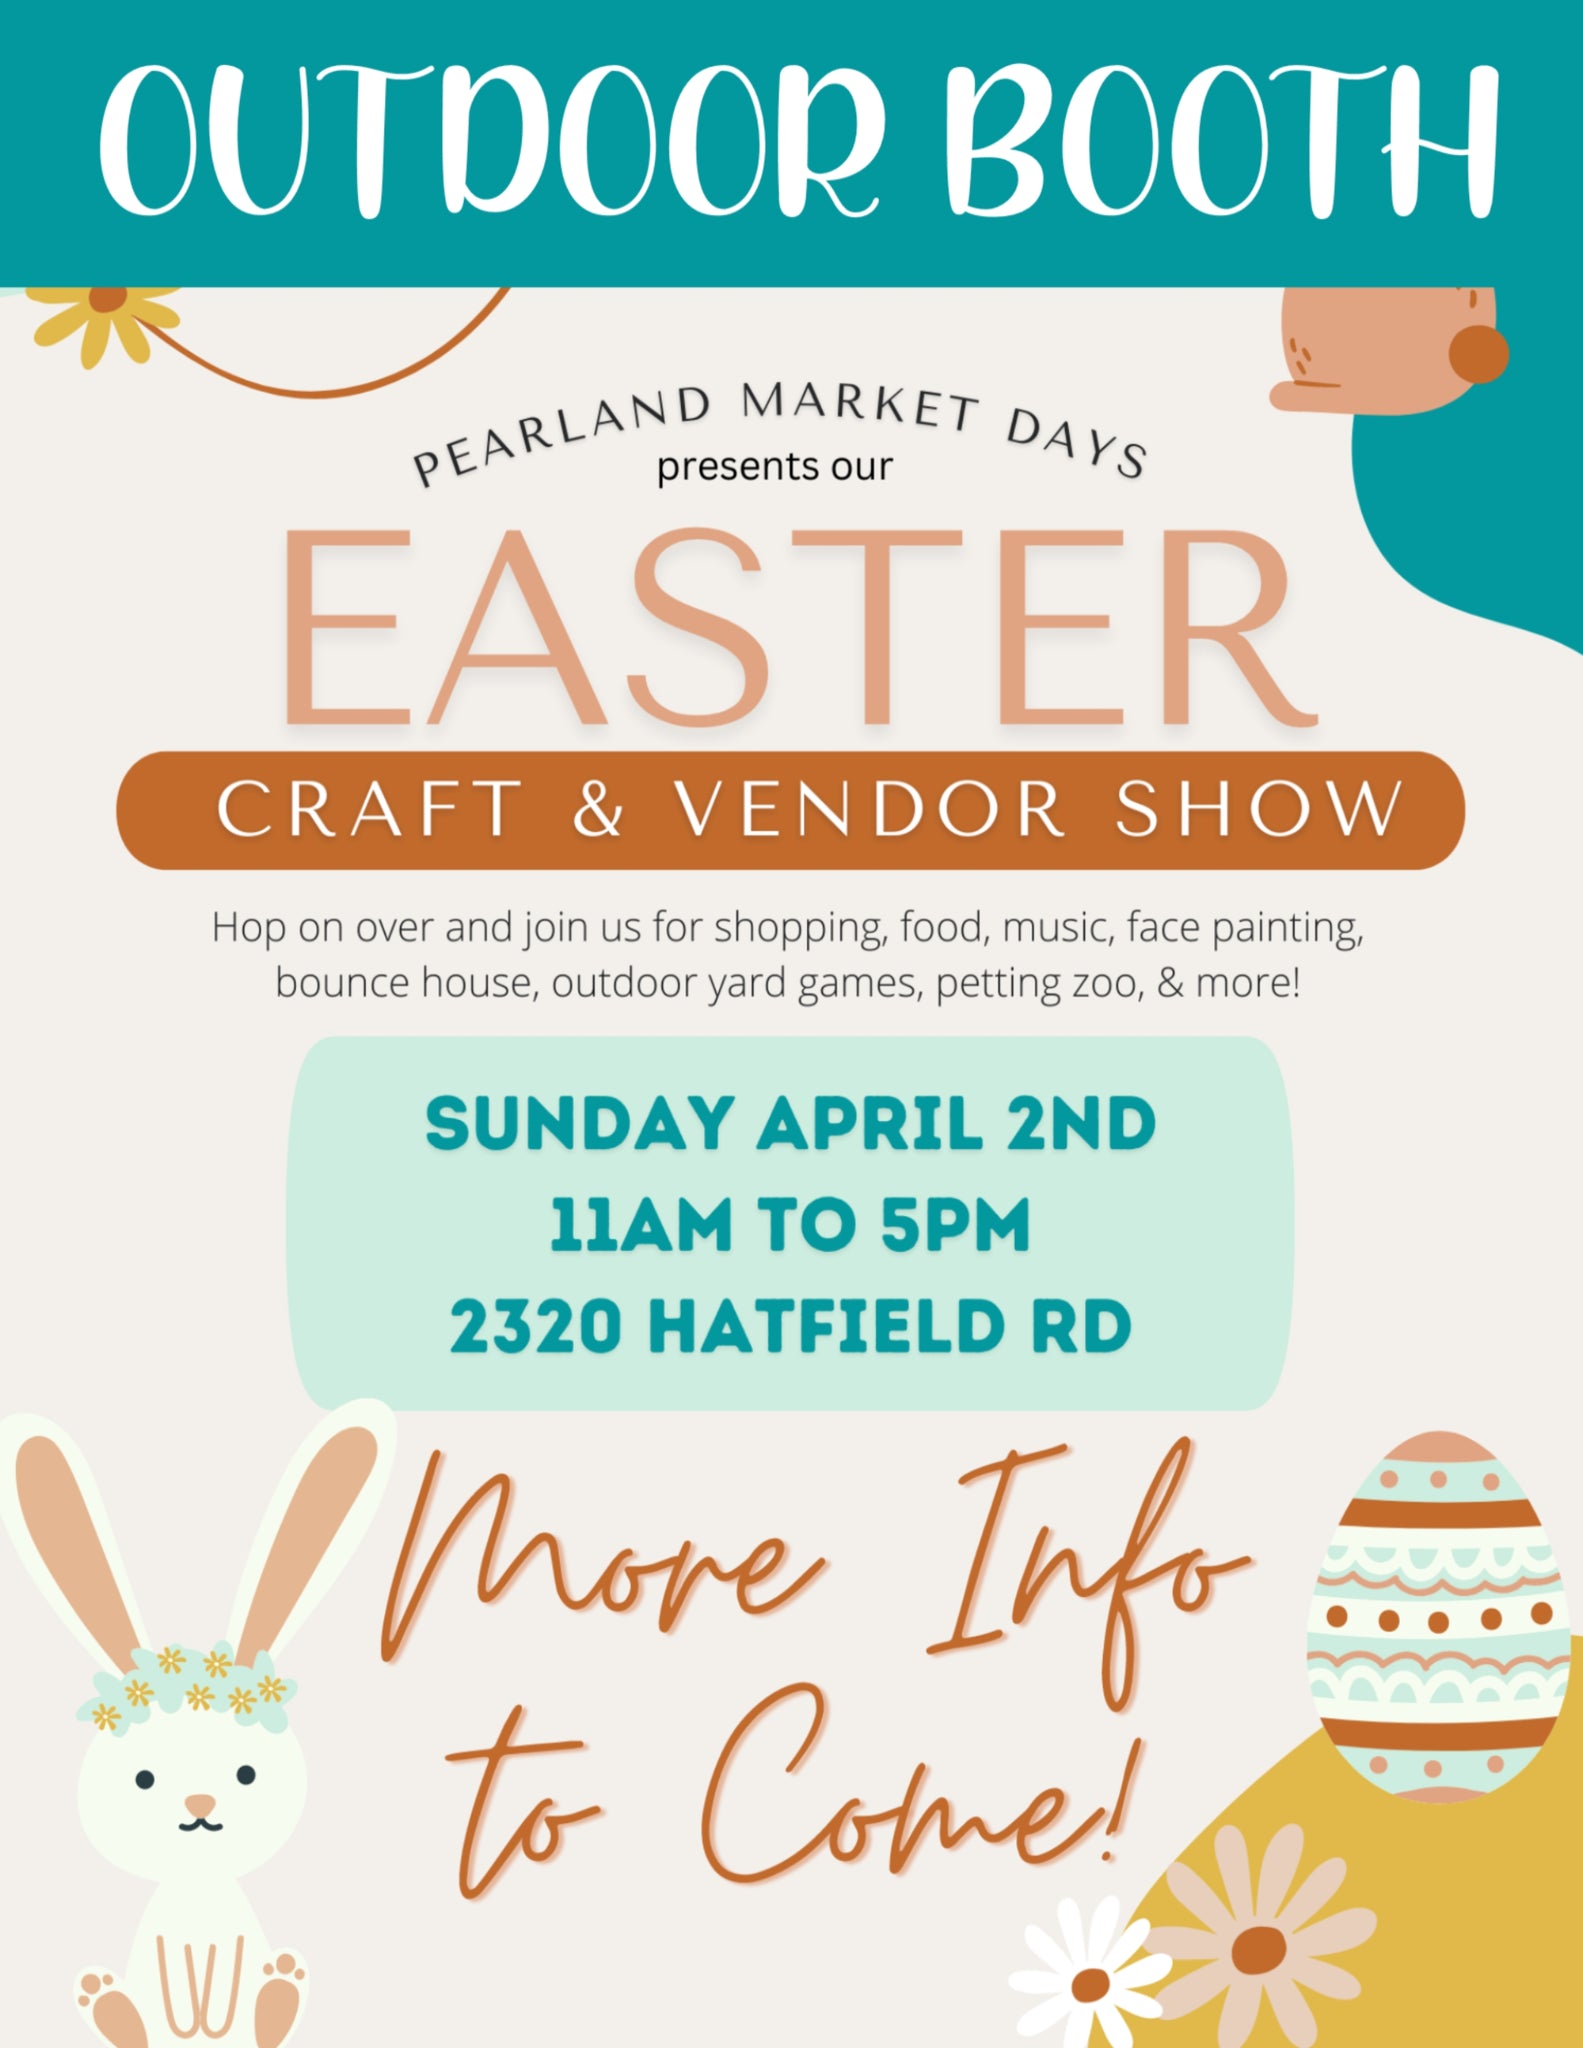 PEARLAND Sunday April 2, 2023 - OUTDOOR BOOTH